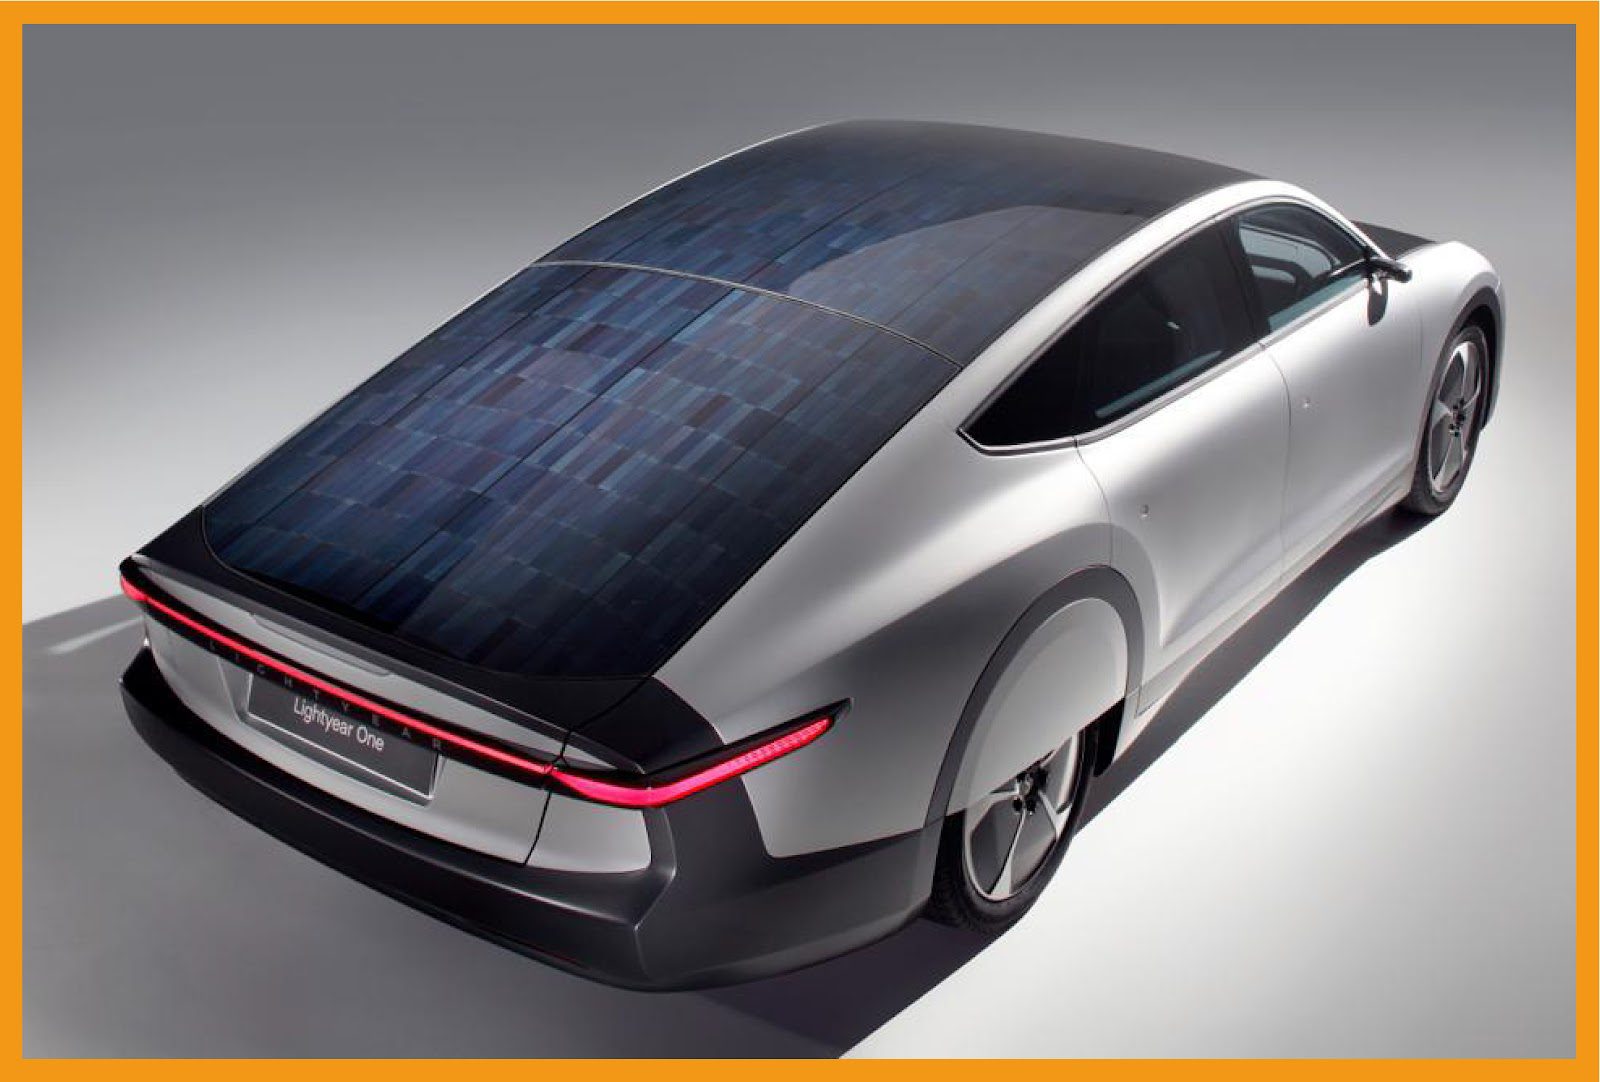 Lightyear 0 solar powered personal car, rear ¾ view with full solar cell coverage of roof and rear visible.